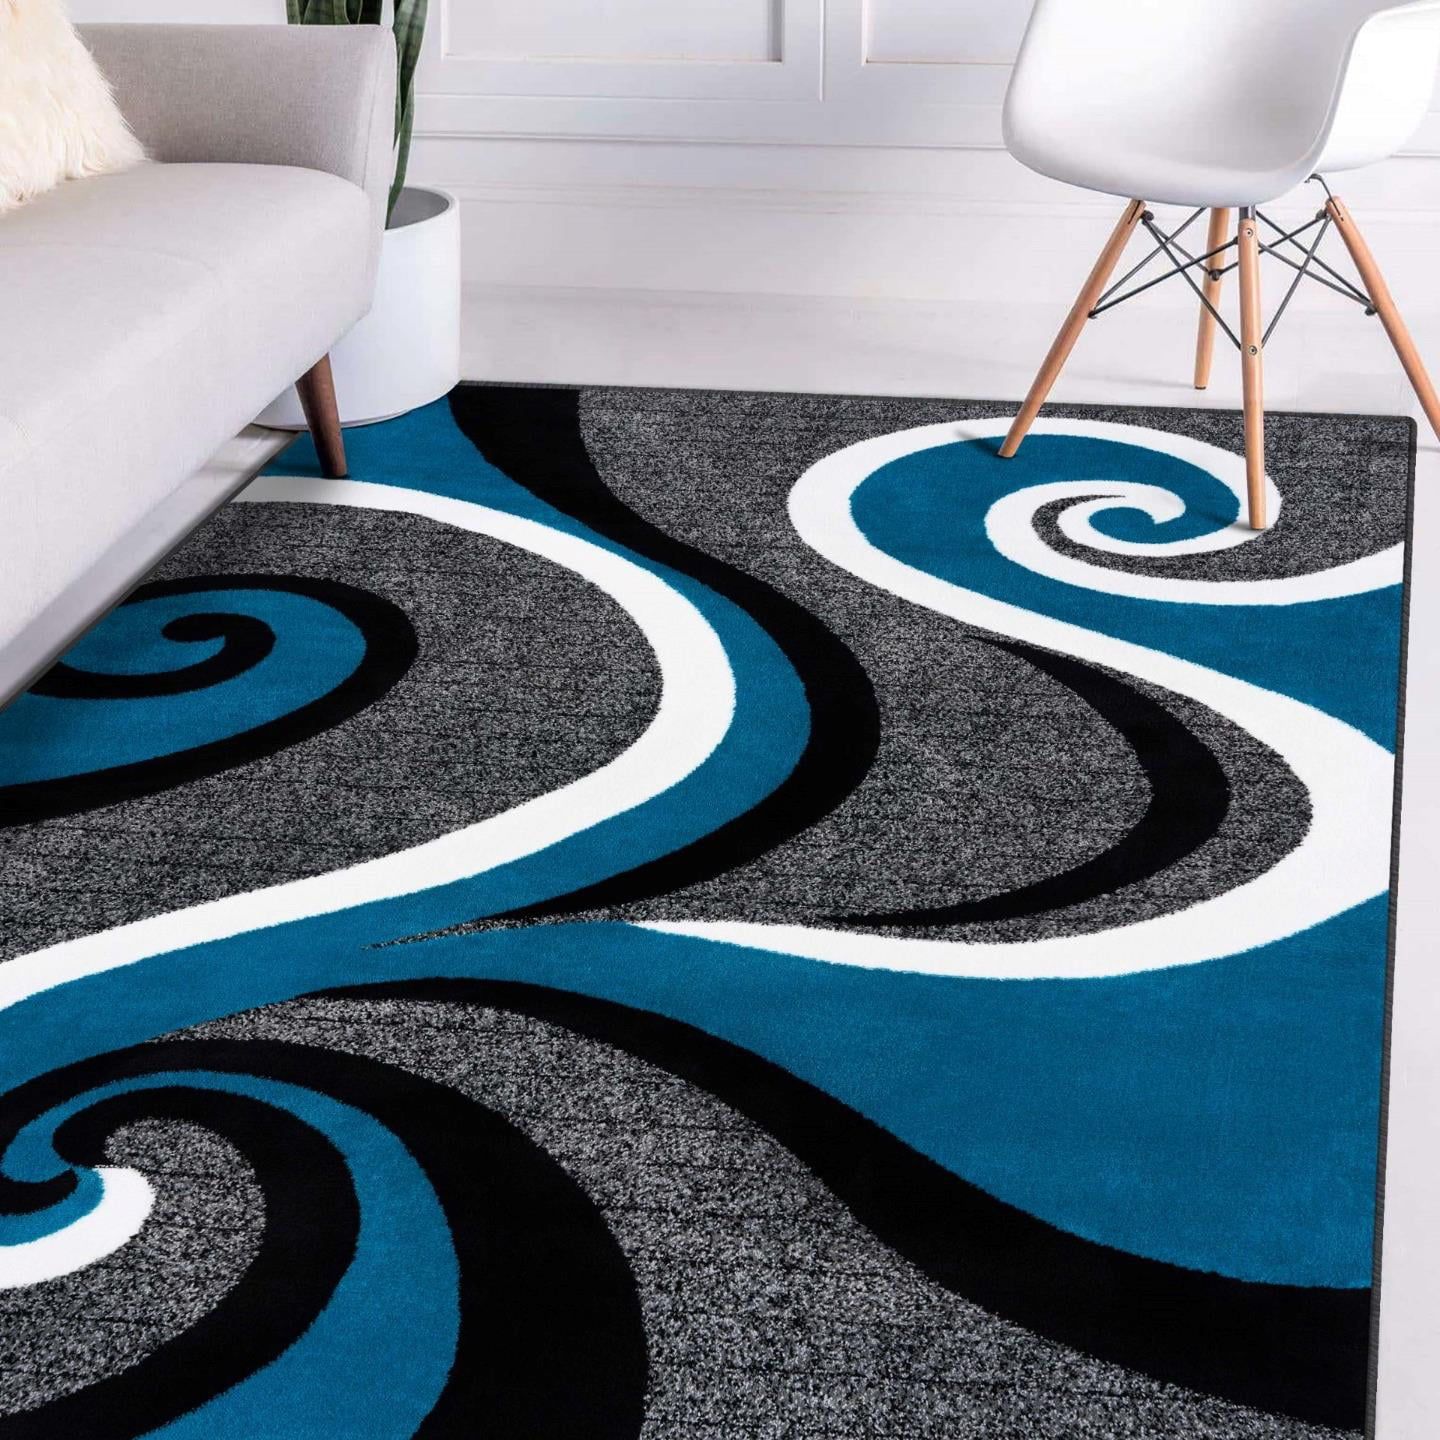 Luxe Weavers Turquoise Swirls Modern Abstract Area Rug 4x5 – Walmart With Regard To Turquoise Rugs (View 10 of 15)